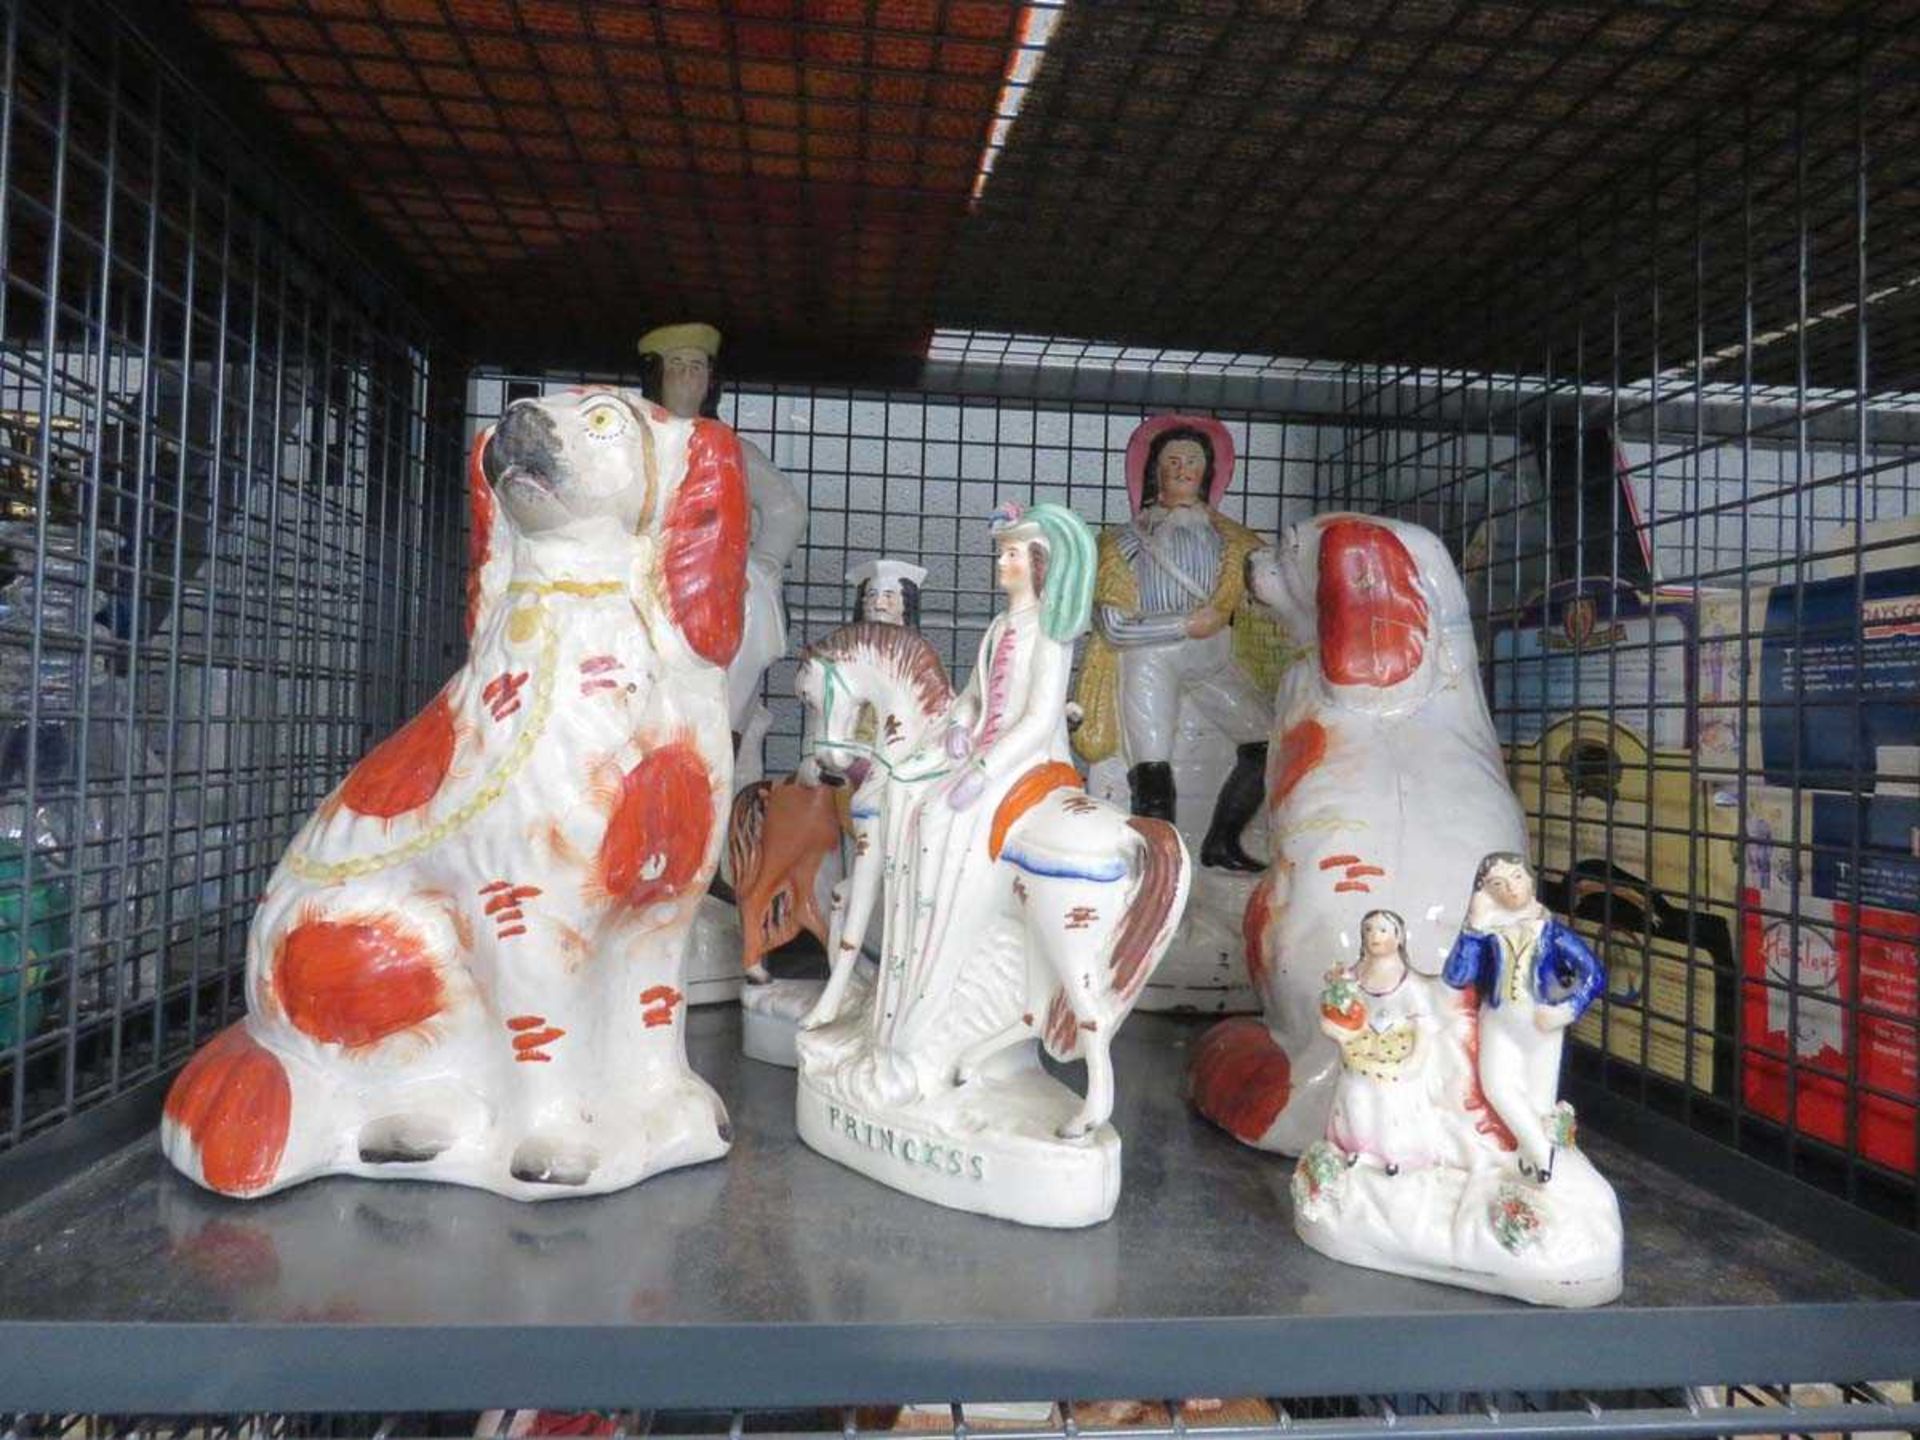 Cage containing Staffordshire flatback figures and dogs